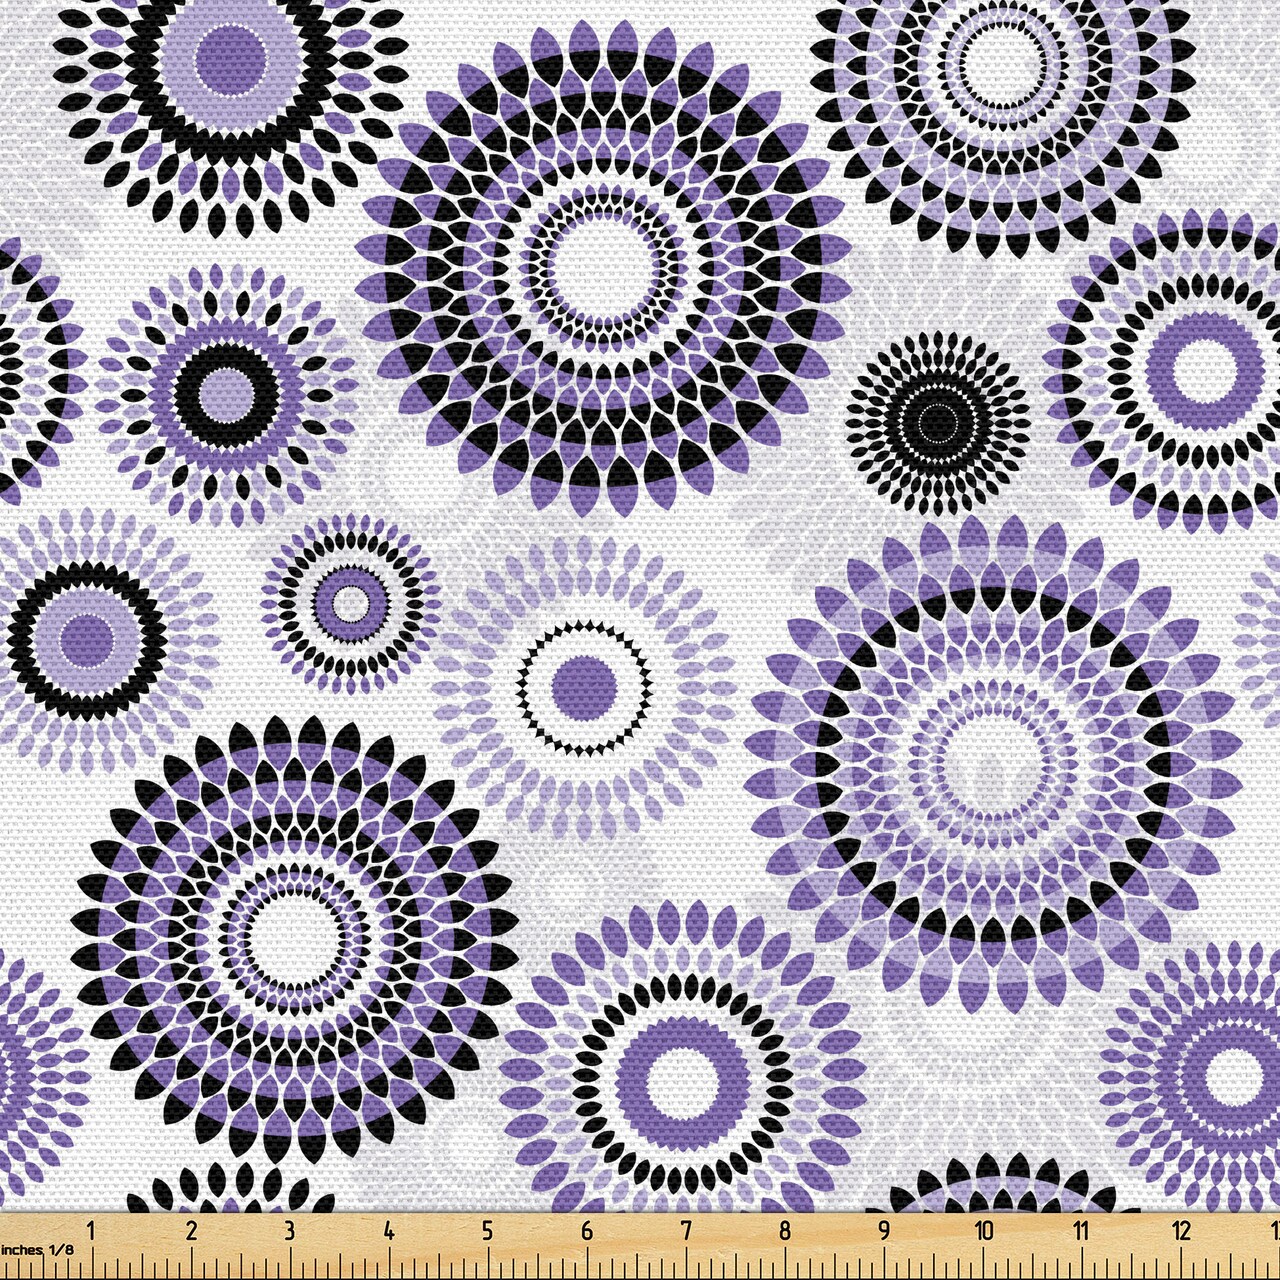 Ambesonne Purple and Black Fabric by The Yard, Scattered Round Big and  Small with Mandala Inspired Design, Decorative Fabric for Upholstery and  Home Accents, 5 Yards, Violet Black